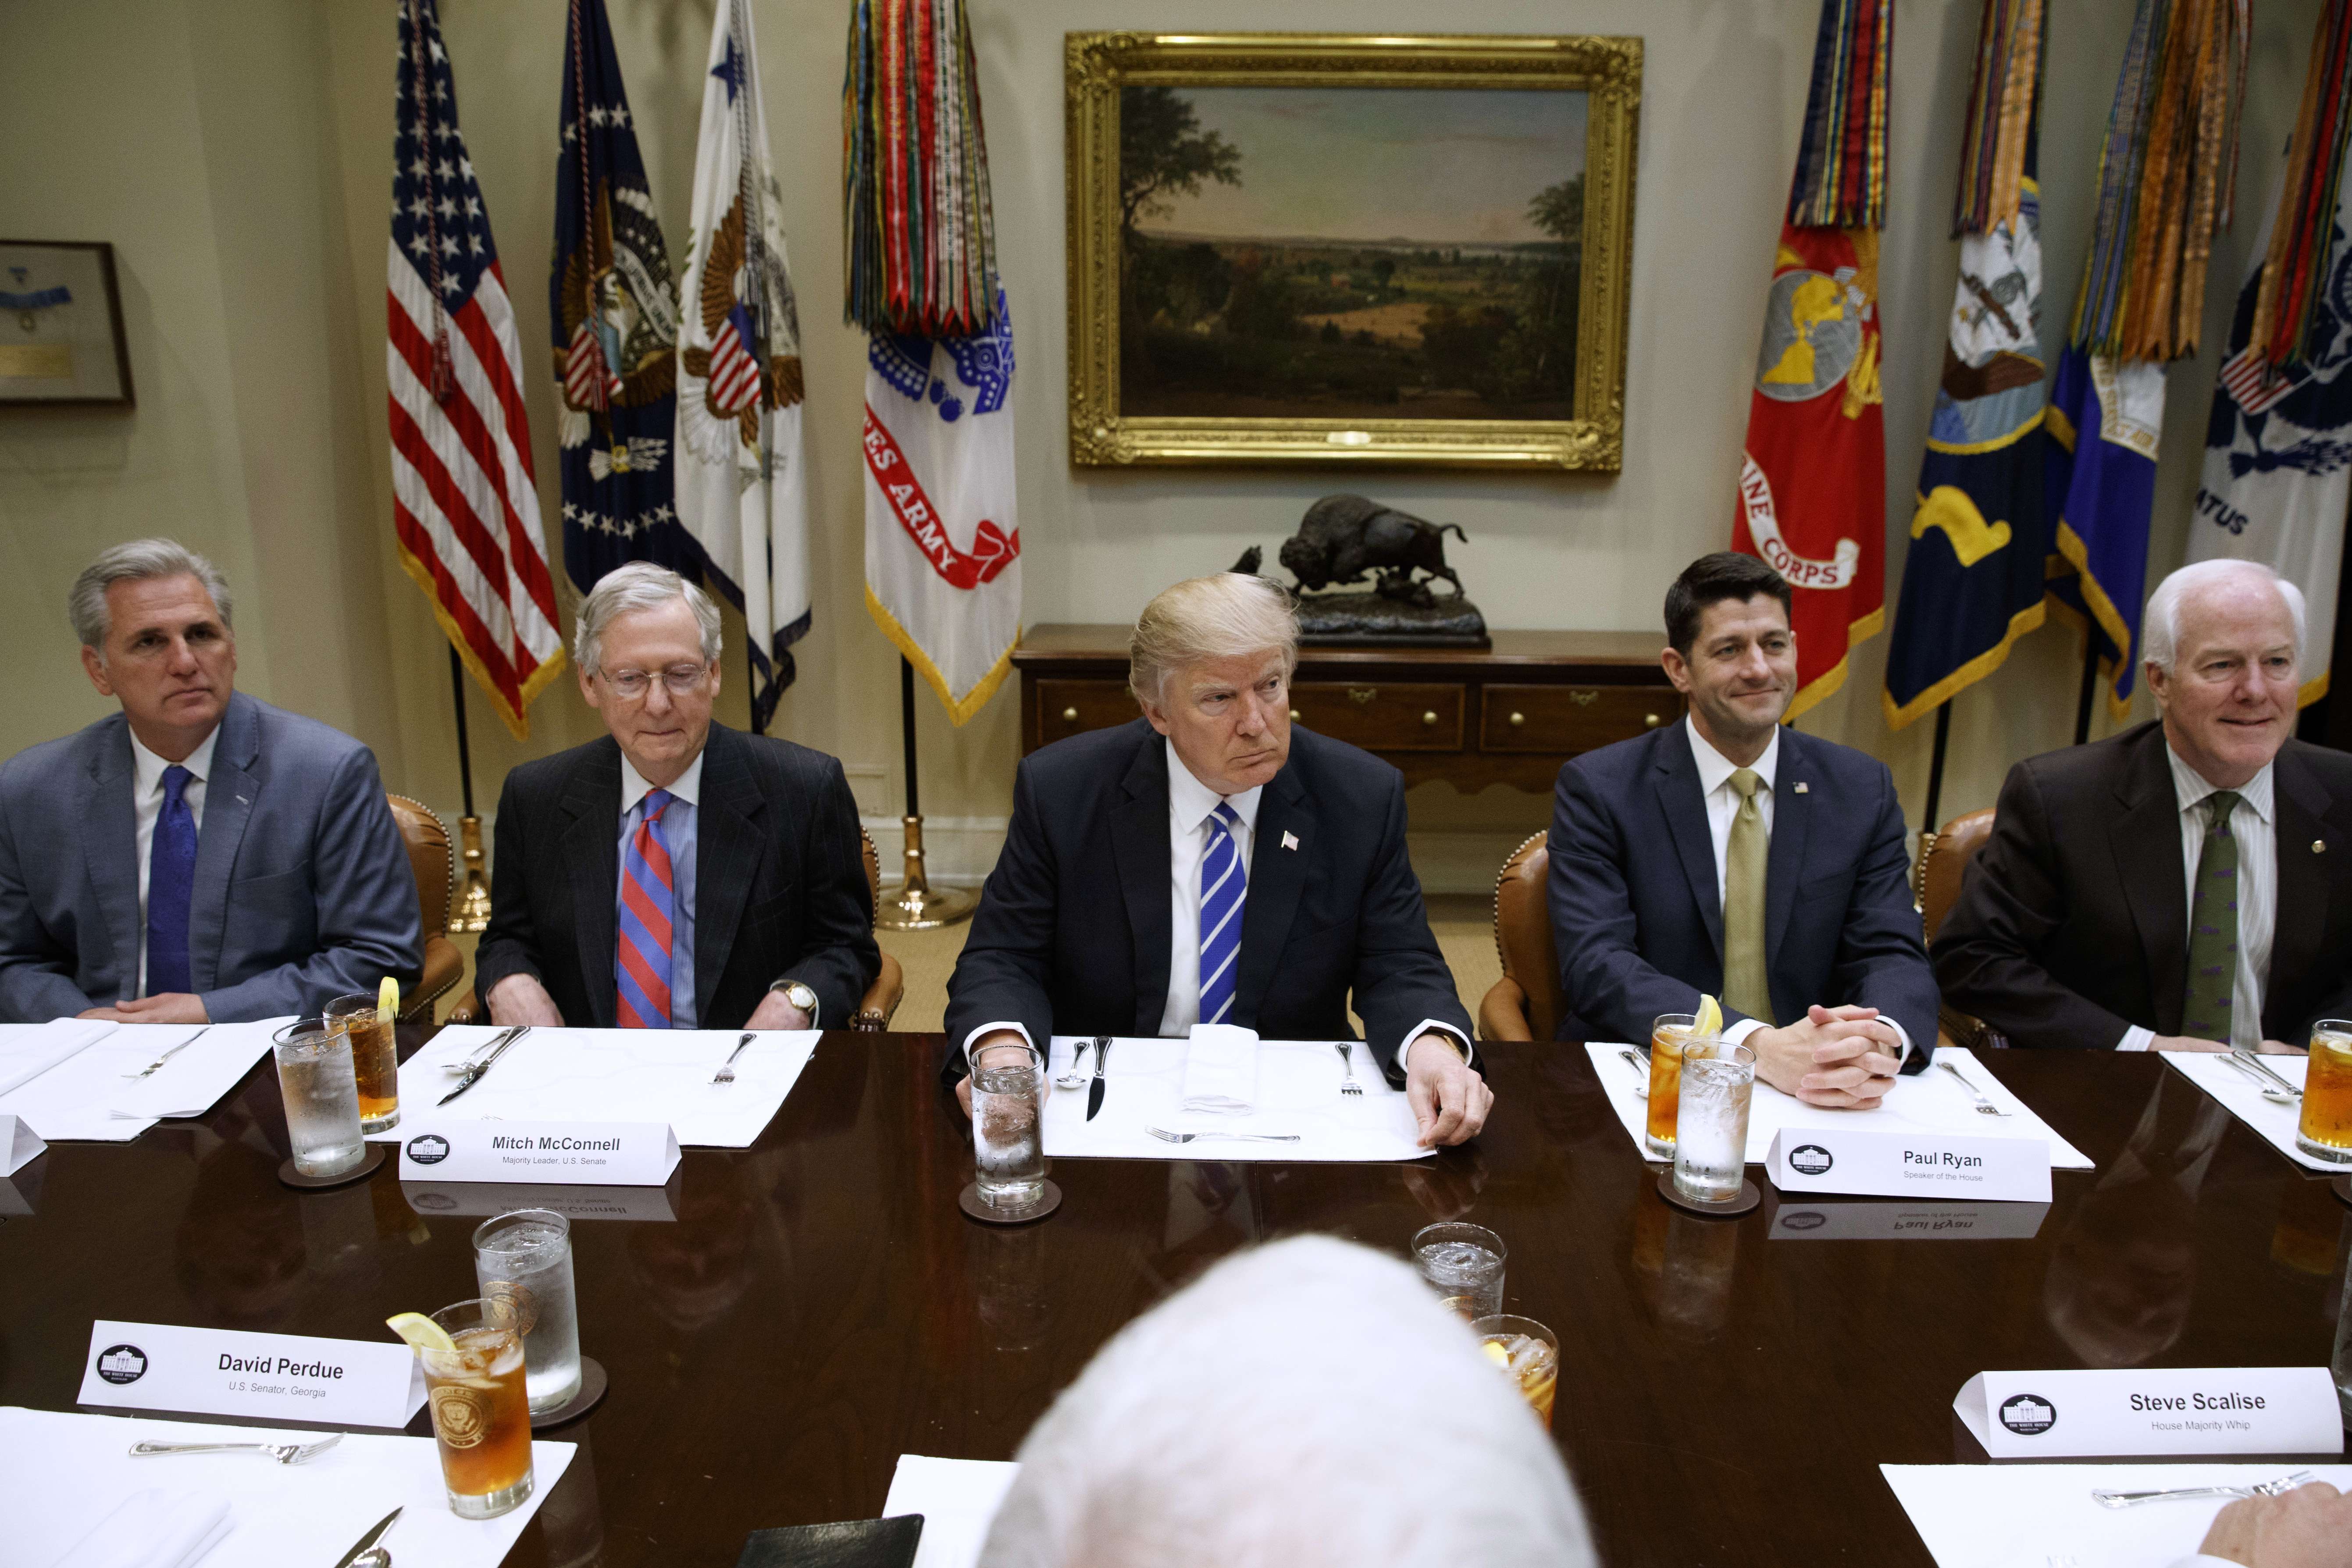 US President Donald Trump hosts a meeting with the House and Senate leadership in the White House on March 1. Among the attendees are (from left) House Republican leader Kevin McCarthy, Senate Republican leader Mitch McConnell and House Speaker Paul Ryan. Photo: AP